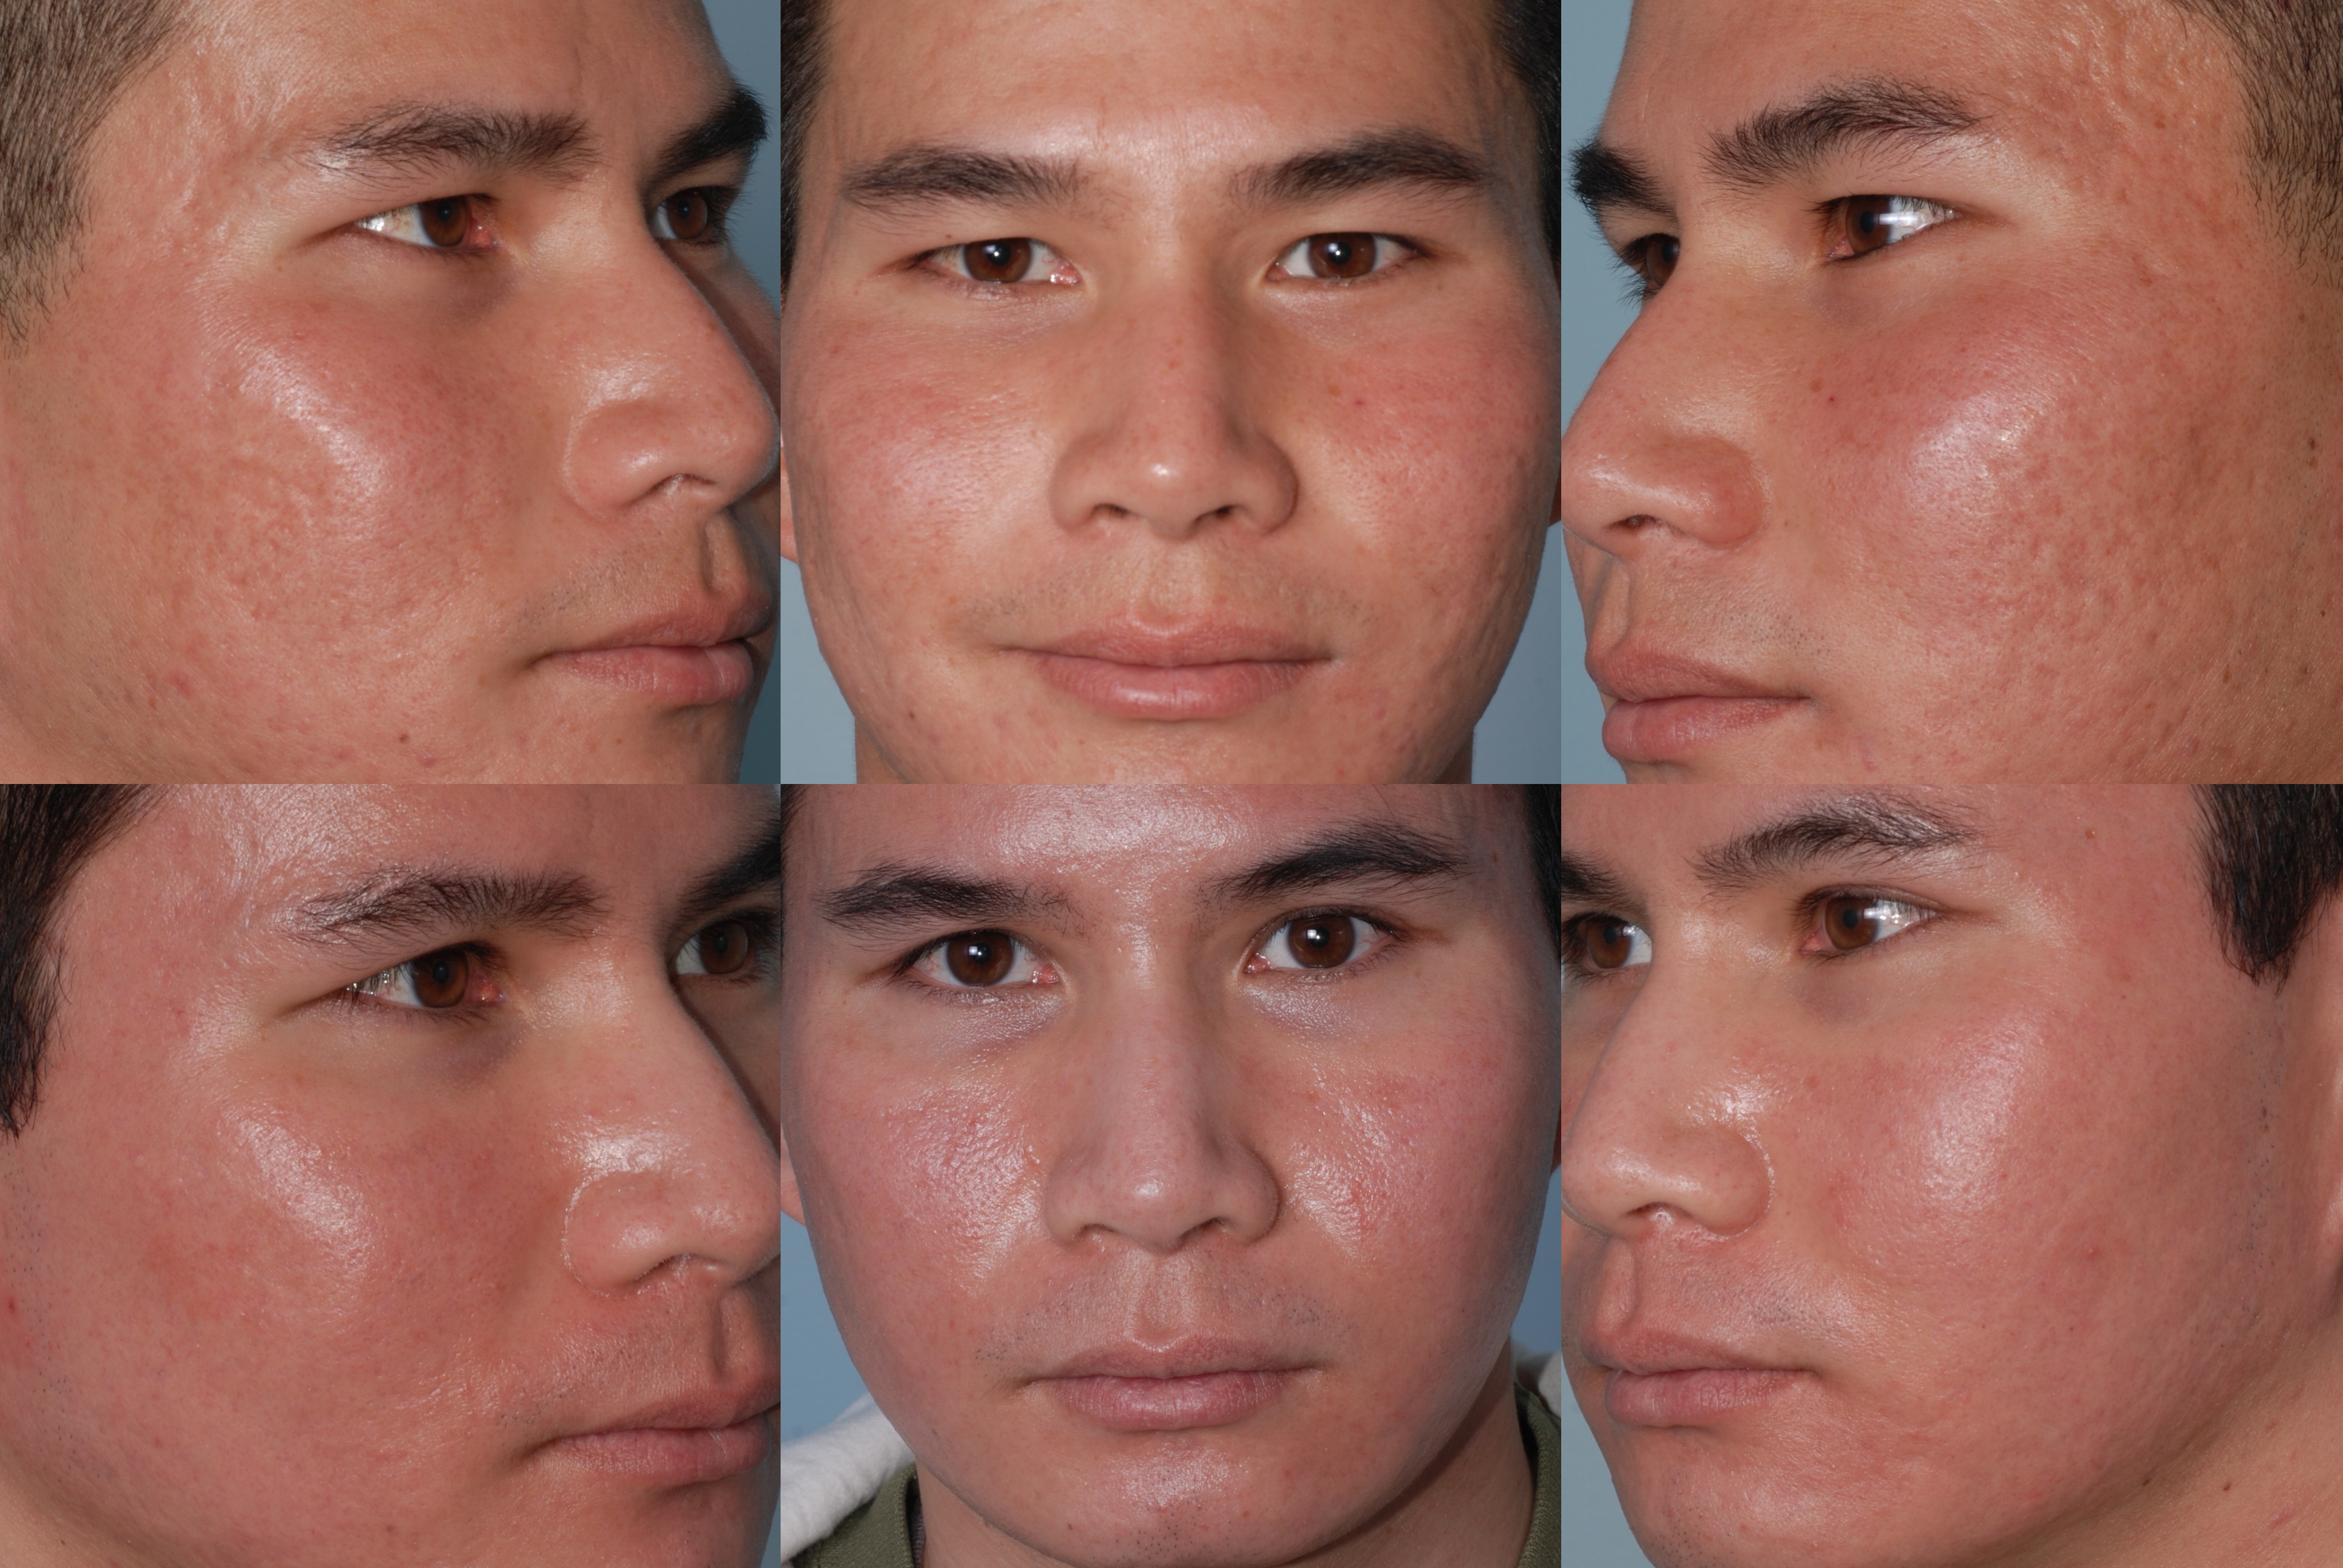 Acne scars treated with a single combination treatment invented by Dr. Mark Taylor using a subcision tool invented by Dr. Mark B. Taylor, MD owner of the Gateway Aesthetic